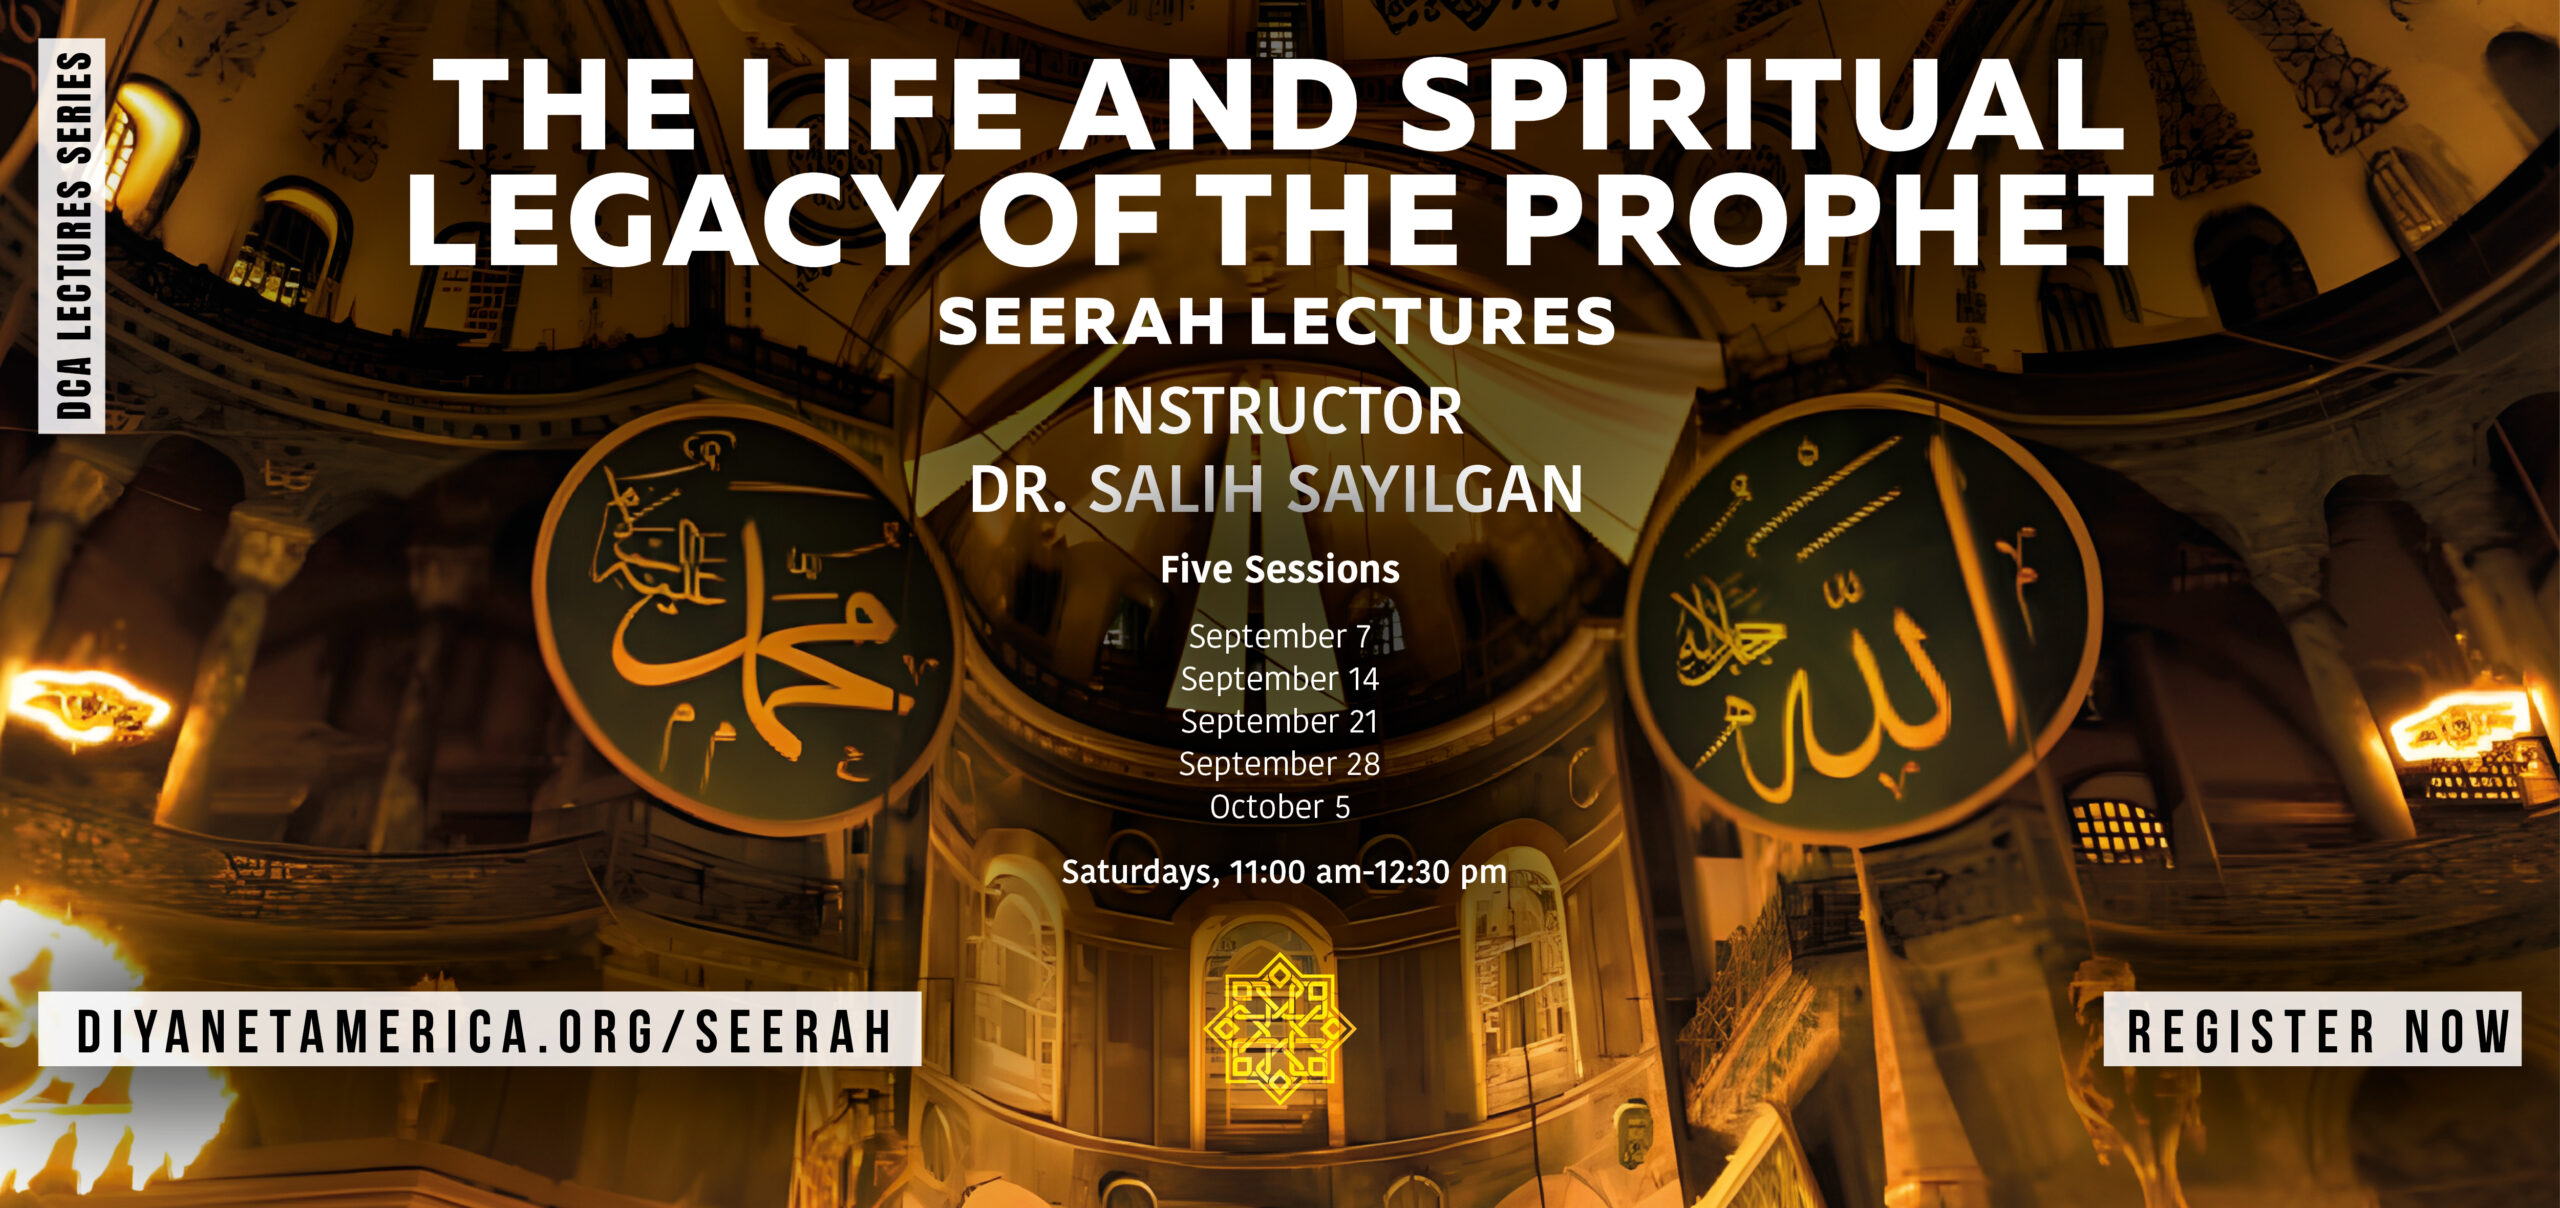 The Life and Spiritual Legacy of the Prophet - Seerah Lectures